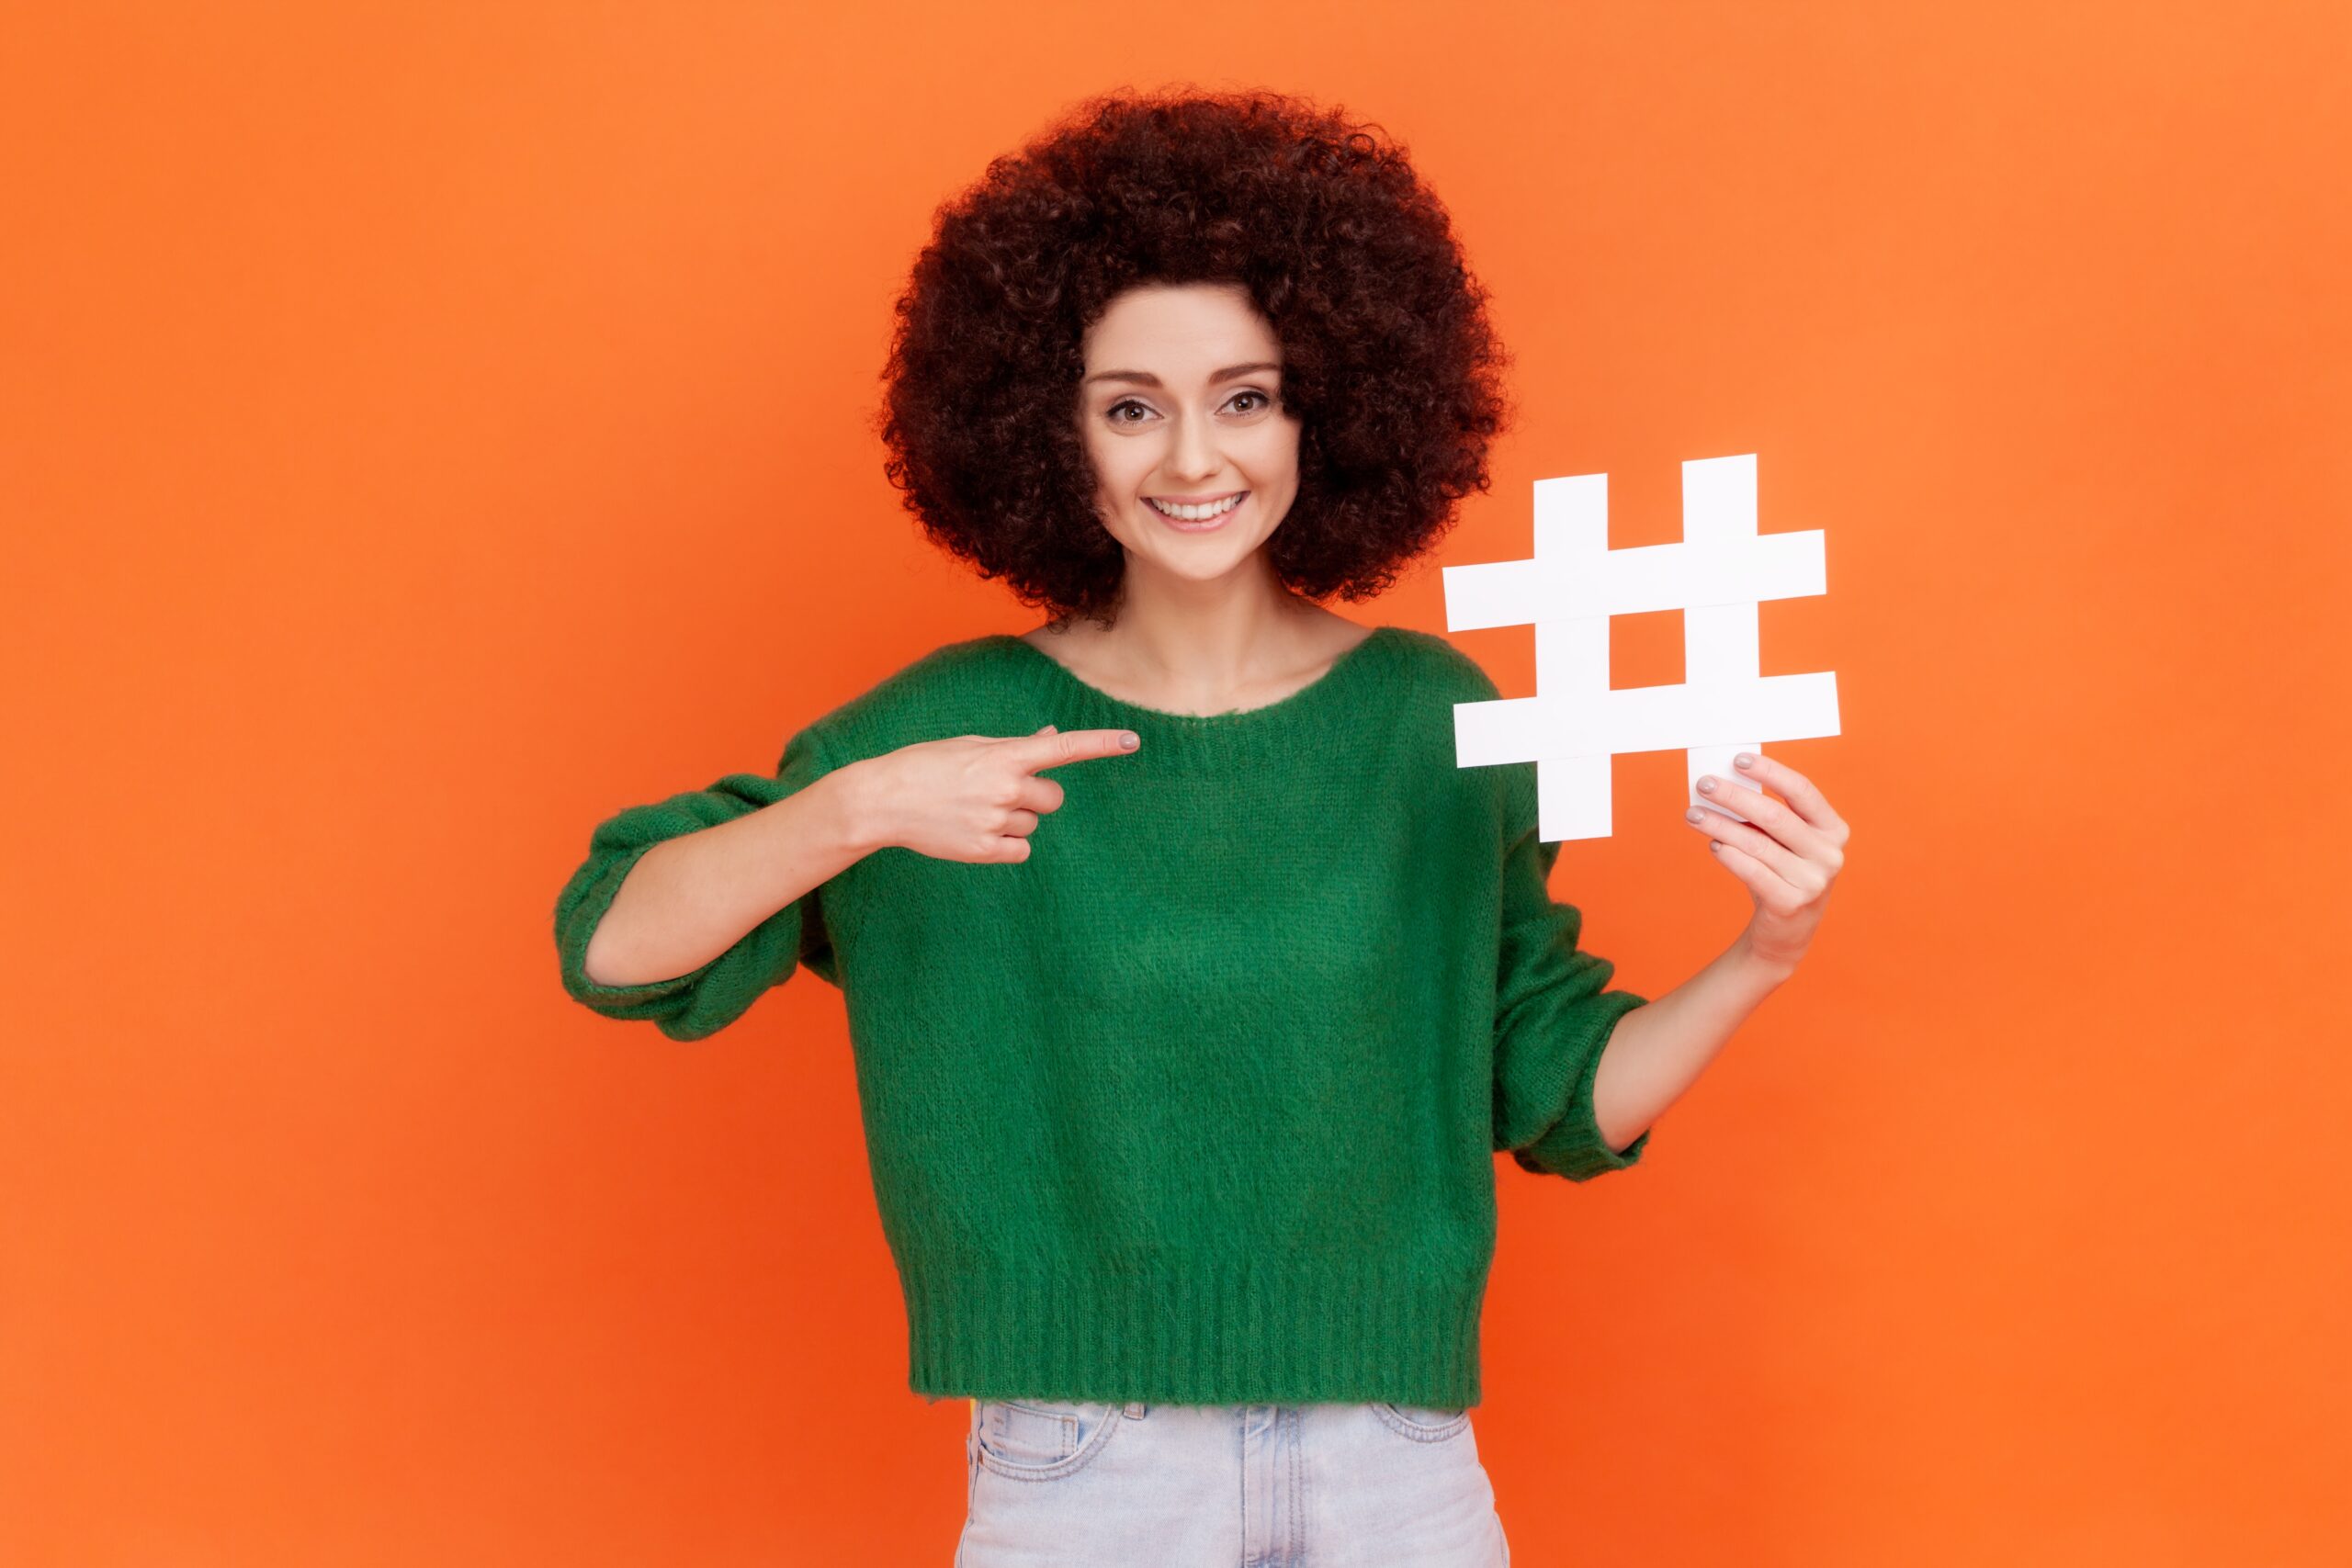 A lady pointing to a hashtag sign she is holding up